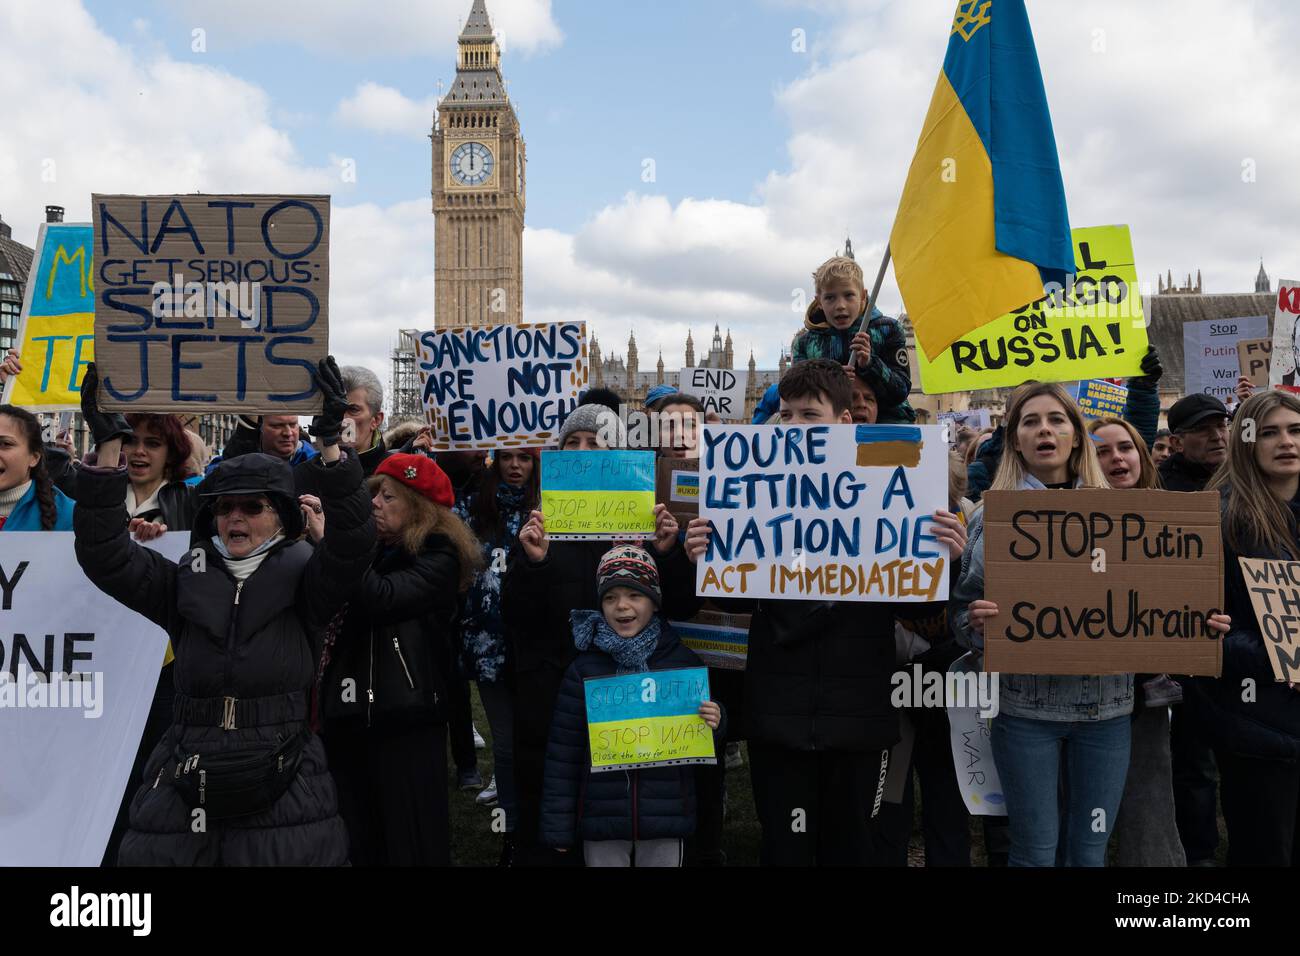 LONDON, UNITED KINGDOM - MARCH 06, 2022: Ukrainian people and their supporters demonstrate in Parliament Square calling on the British government to support Ukraine by supplying air defence and anti-missile systems, implementing further sanctions including ban on energy trade, exclusion of all Russian banks from Swift payment network and help for refugees on the 11th day of Russian military invasion into the Ukrainian territory on March 06, 2022 in London, England. (Photo by WIktor Szymanowicz/NurPhoto) Stock Photo